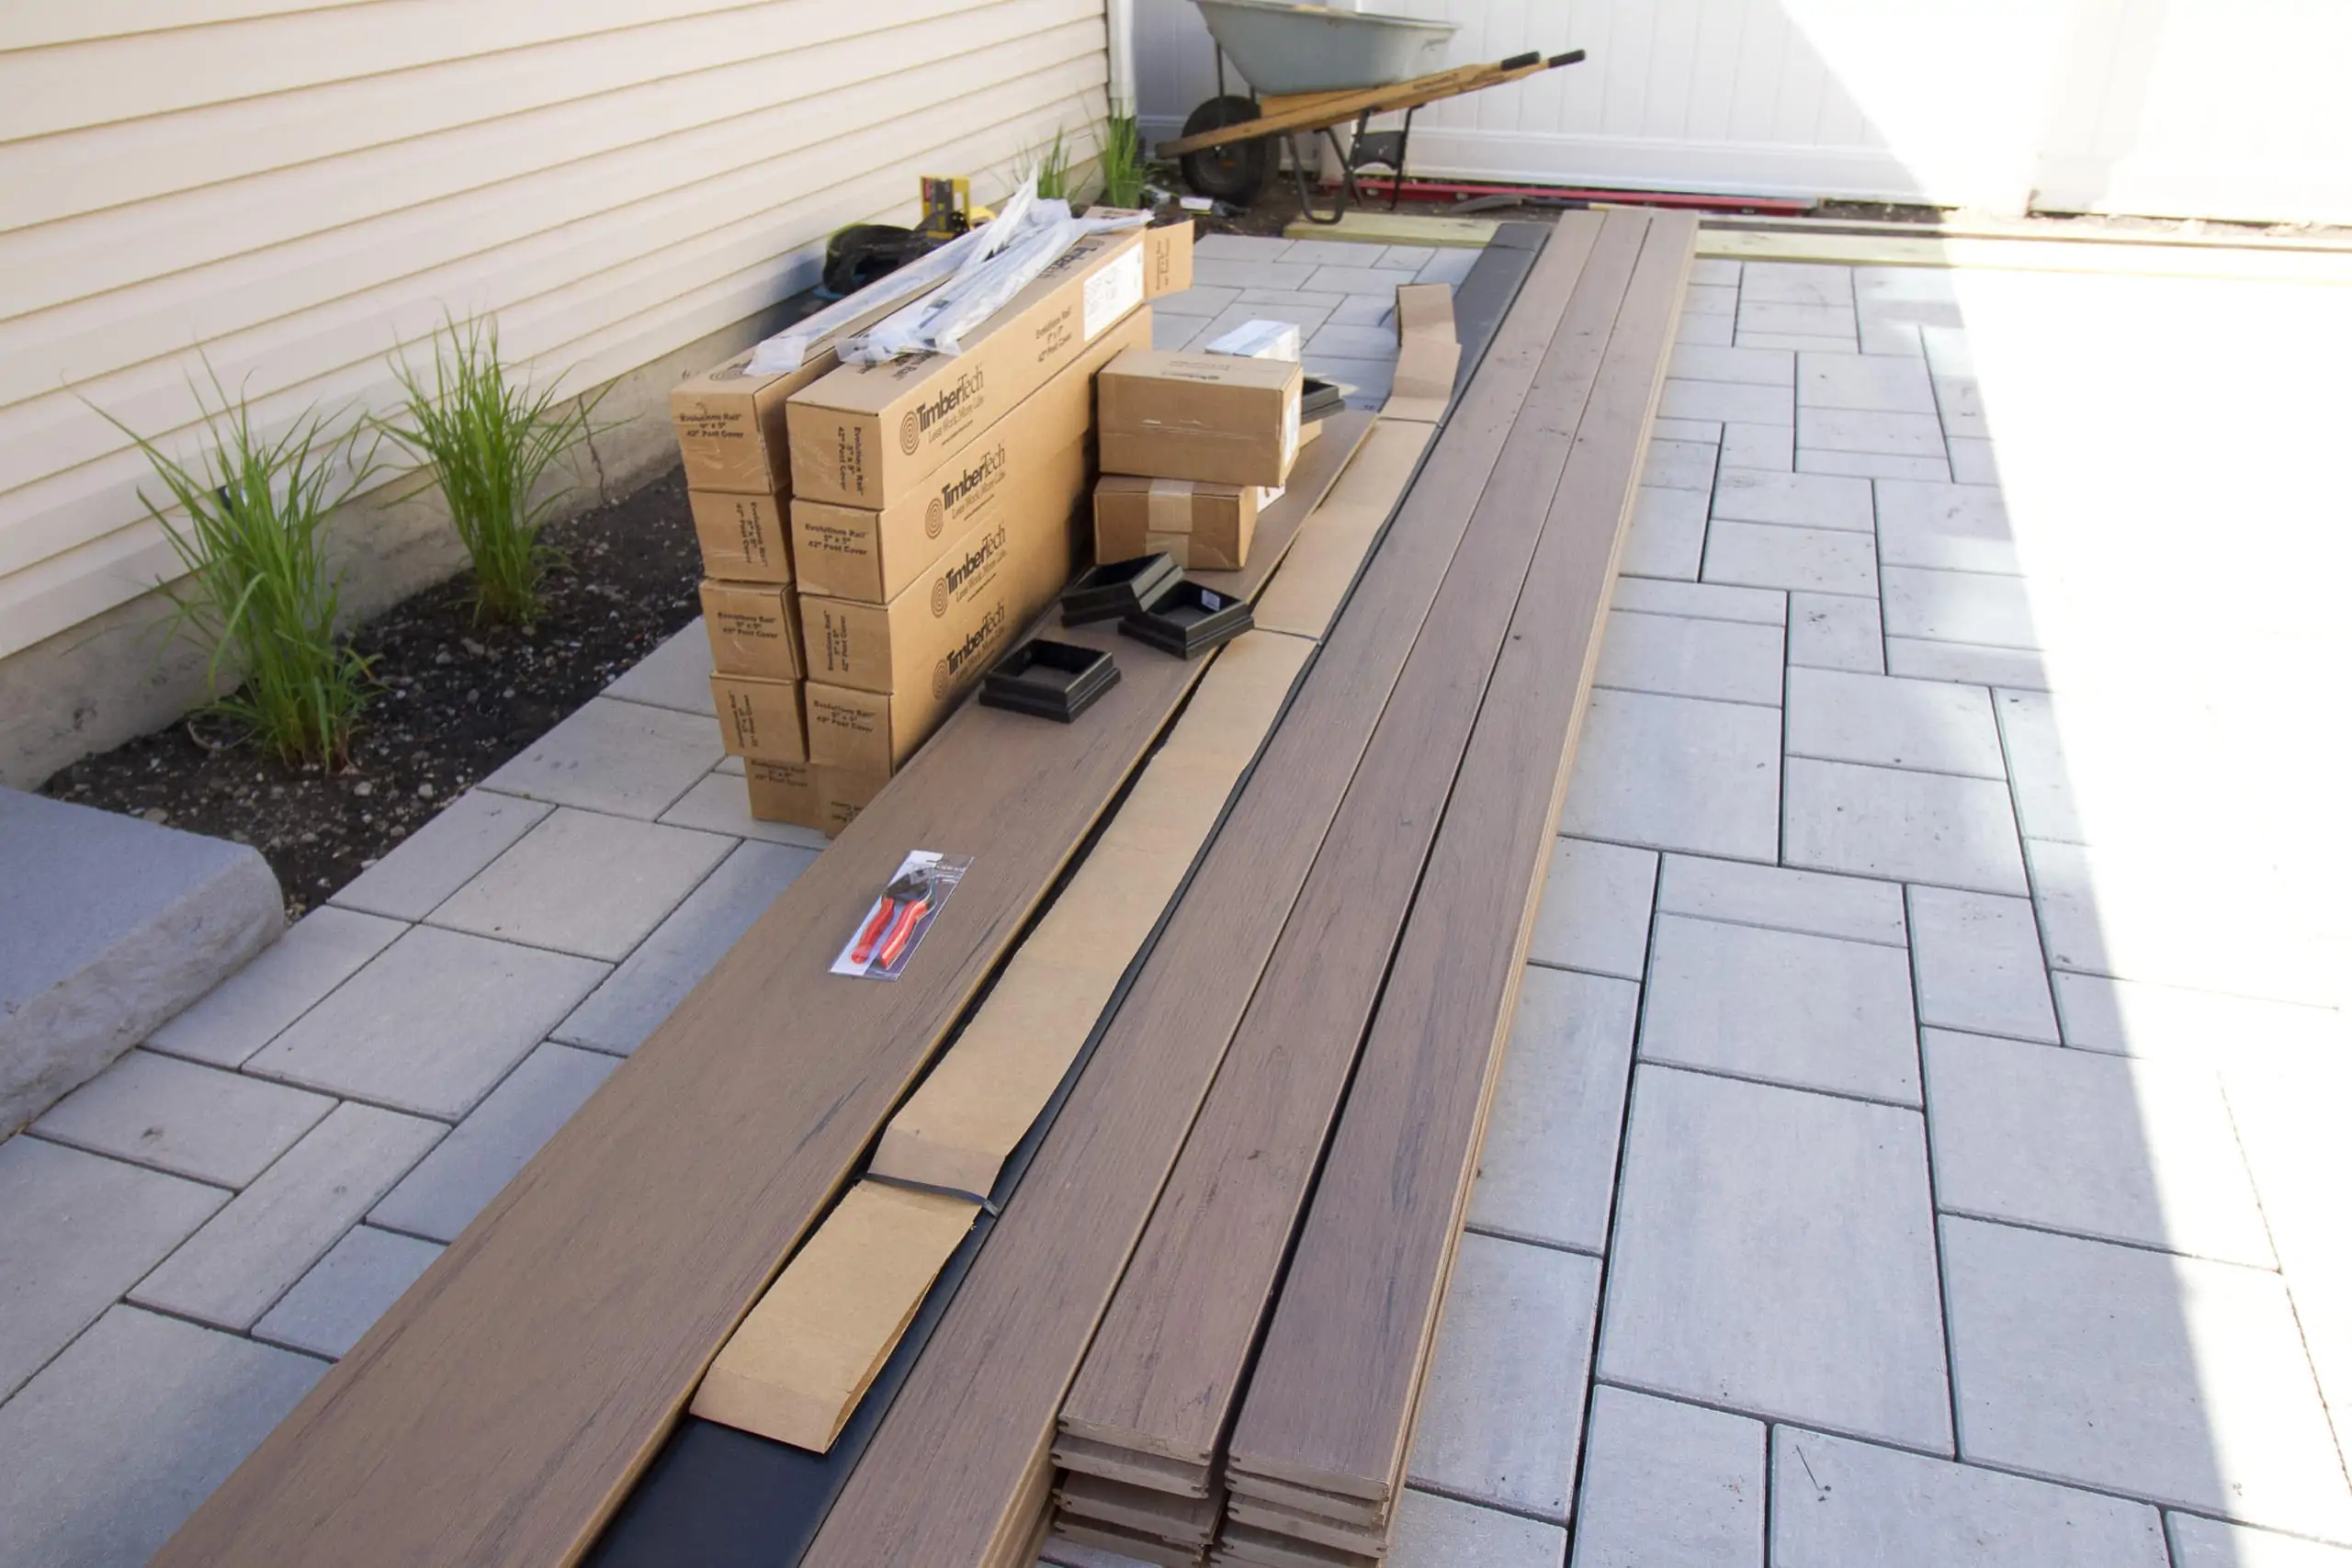 Our decking material from TimberTech